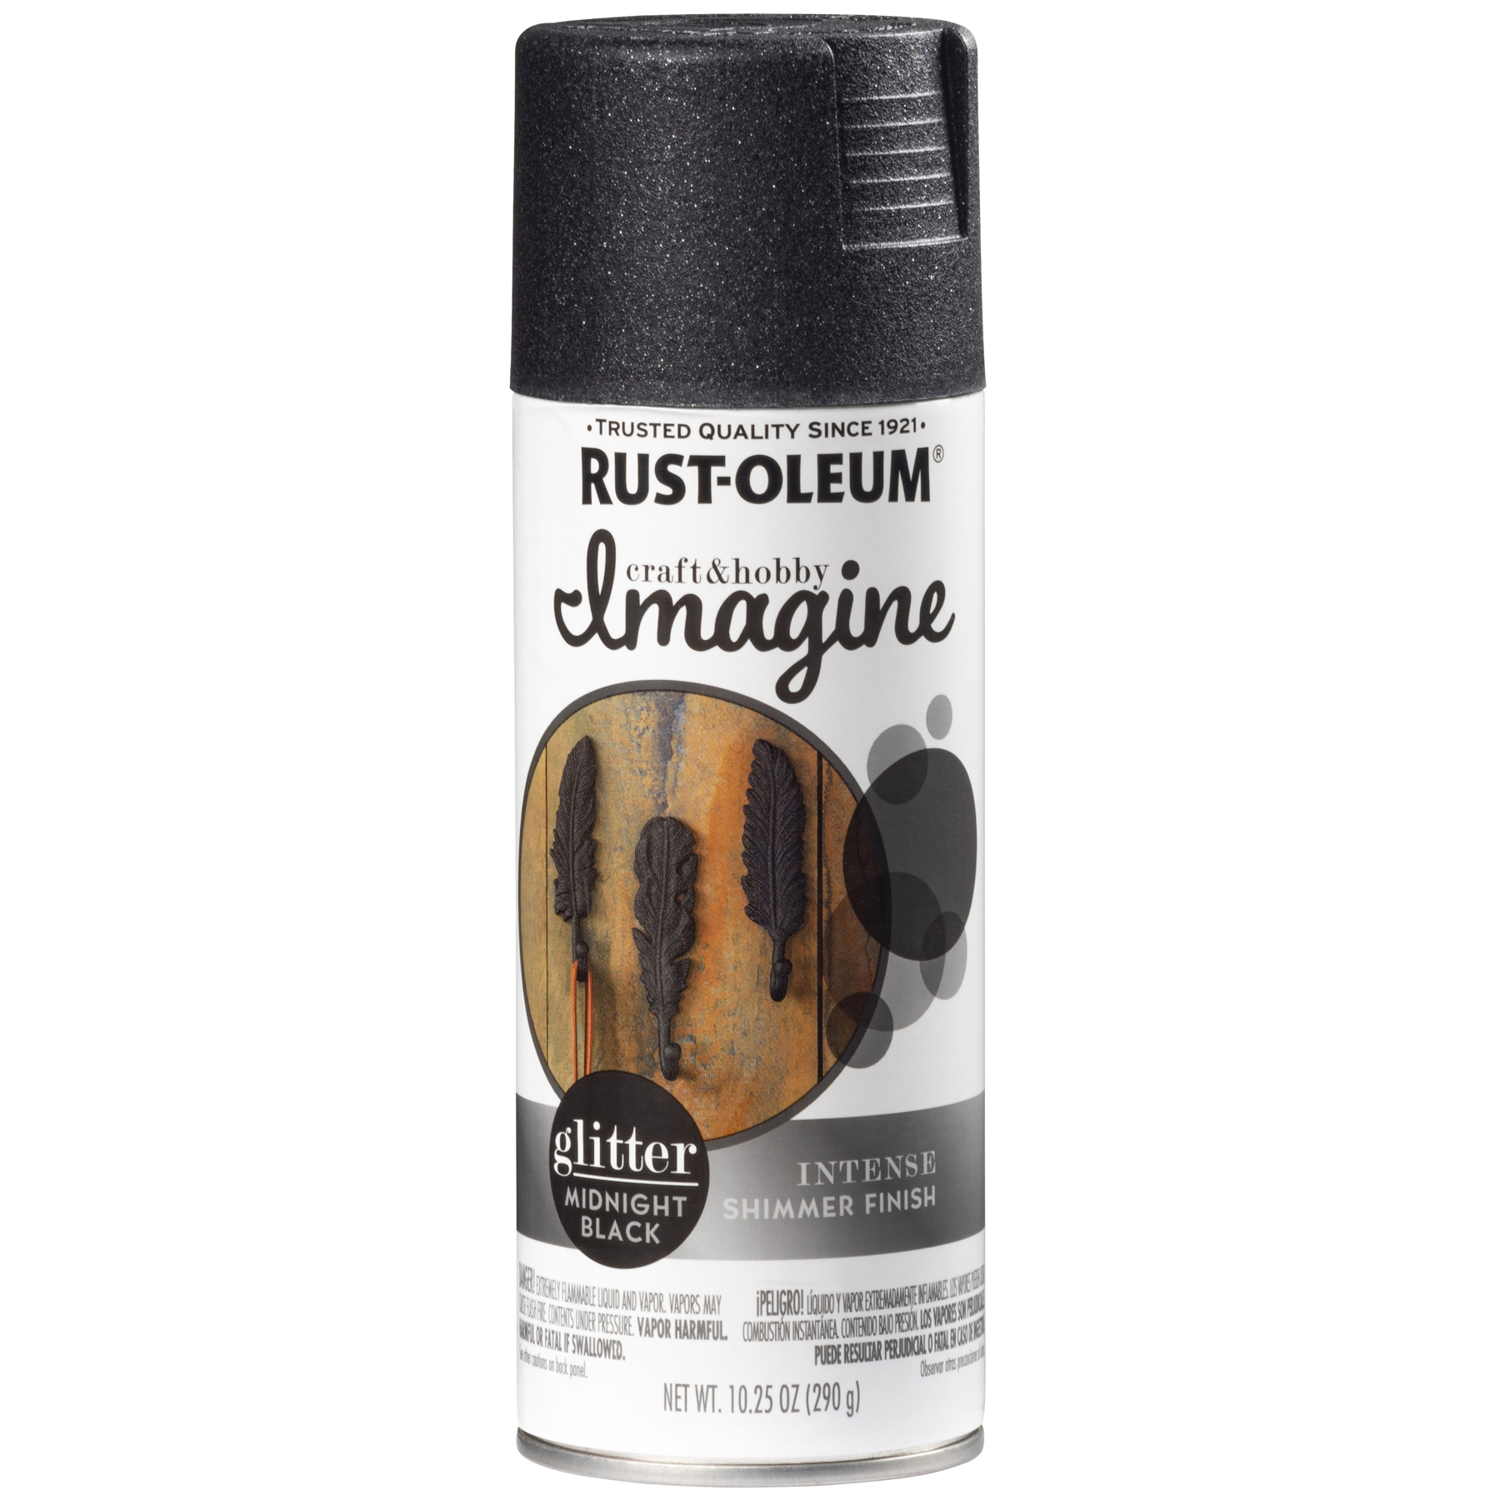 Gold, Rust-Oleum Specialty Glitter Spray Paint- 10.25, 6 Pack, Size: 10.25 oz